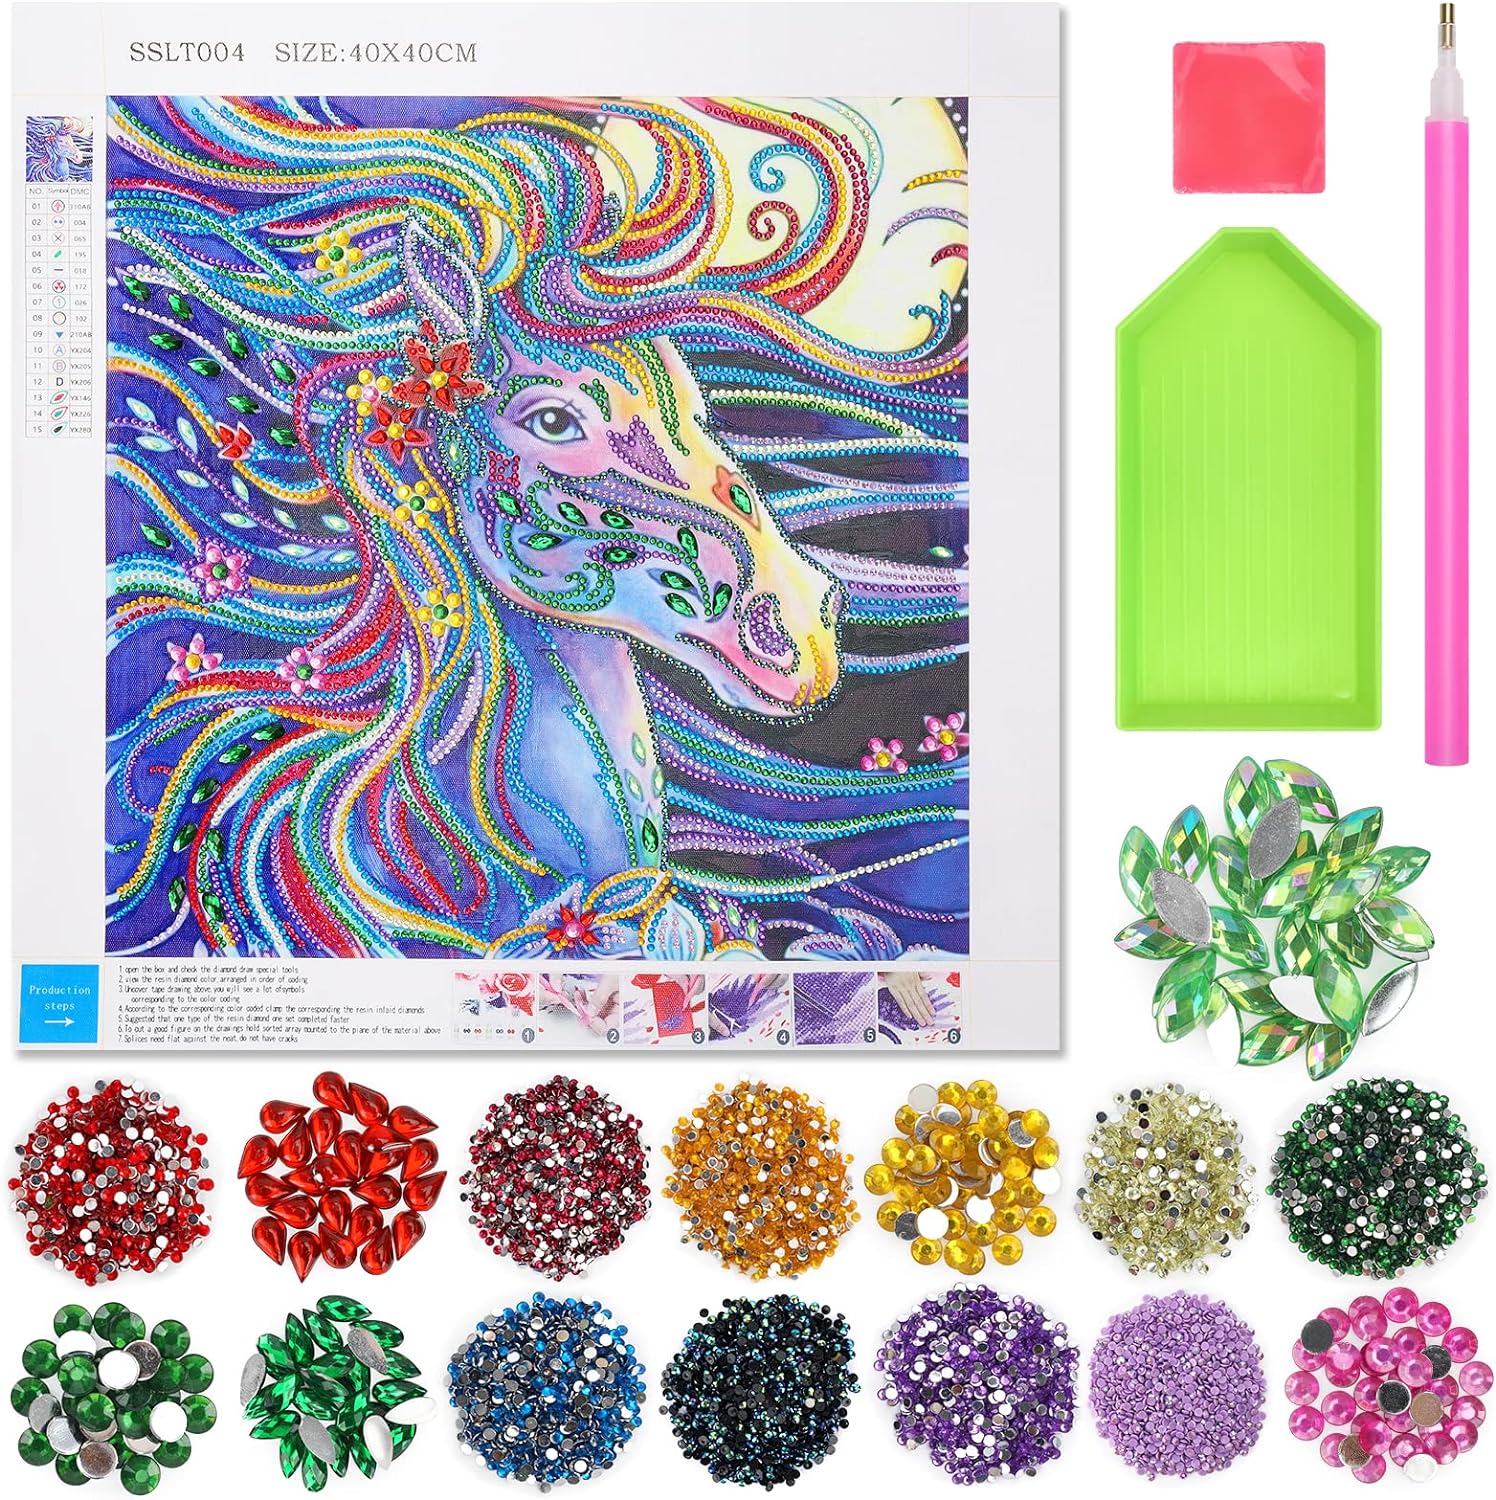 Horse Gifts for Girls Age 9 10 11 12 13, DIY Diamond Painting Kits with Diamond Draw Special Tools for 8-10 Years Old Girls Kids Boys | Arts and Crafts for Kids | Presents for Birthday & Christmas